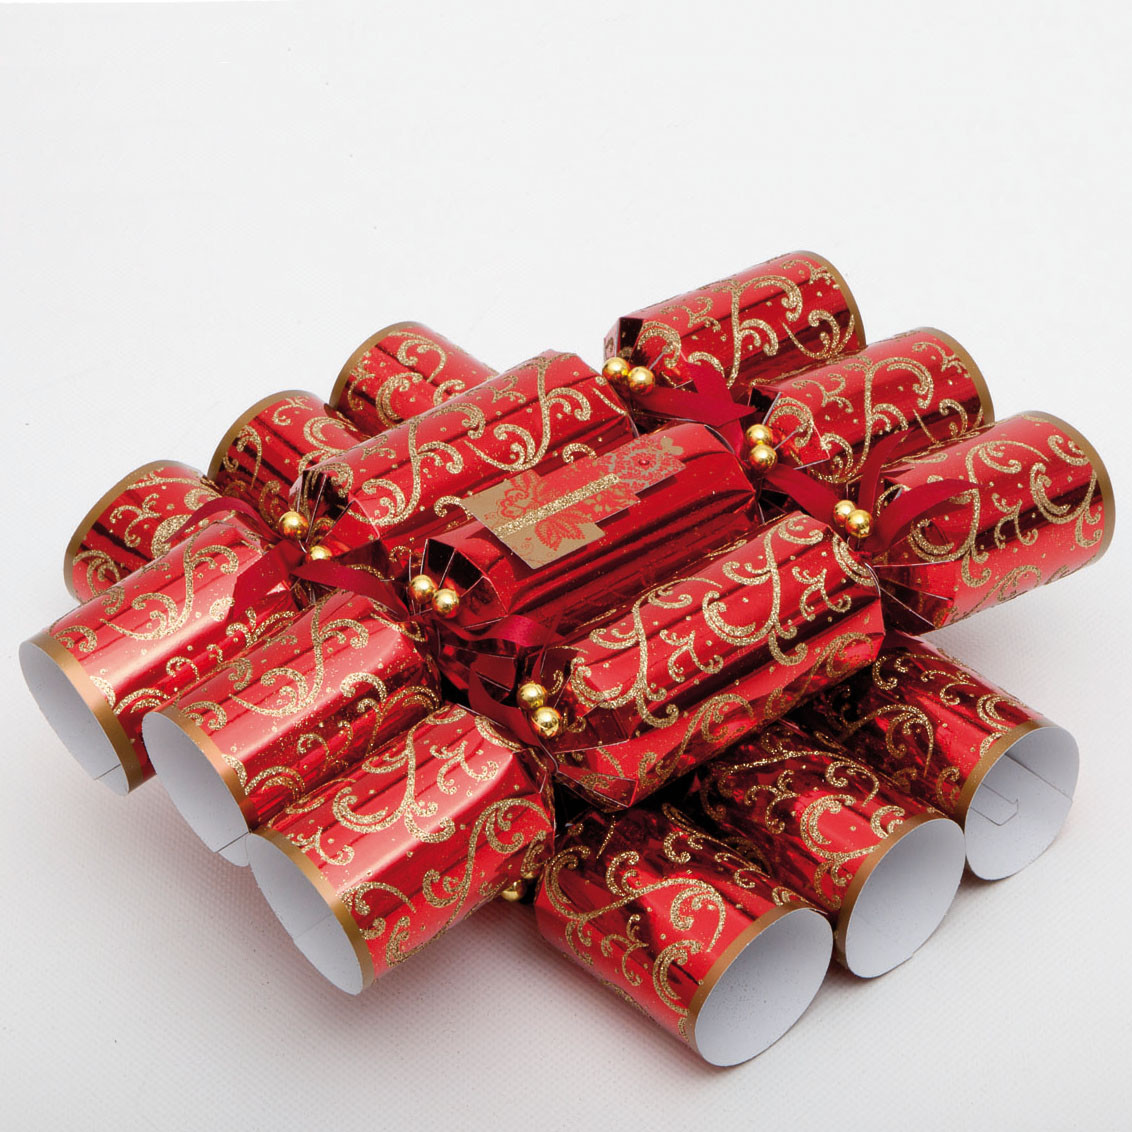 Christmas Crackers Uk
 CW004 Red and Gold Christmas Crackers